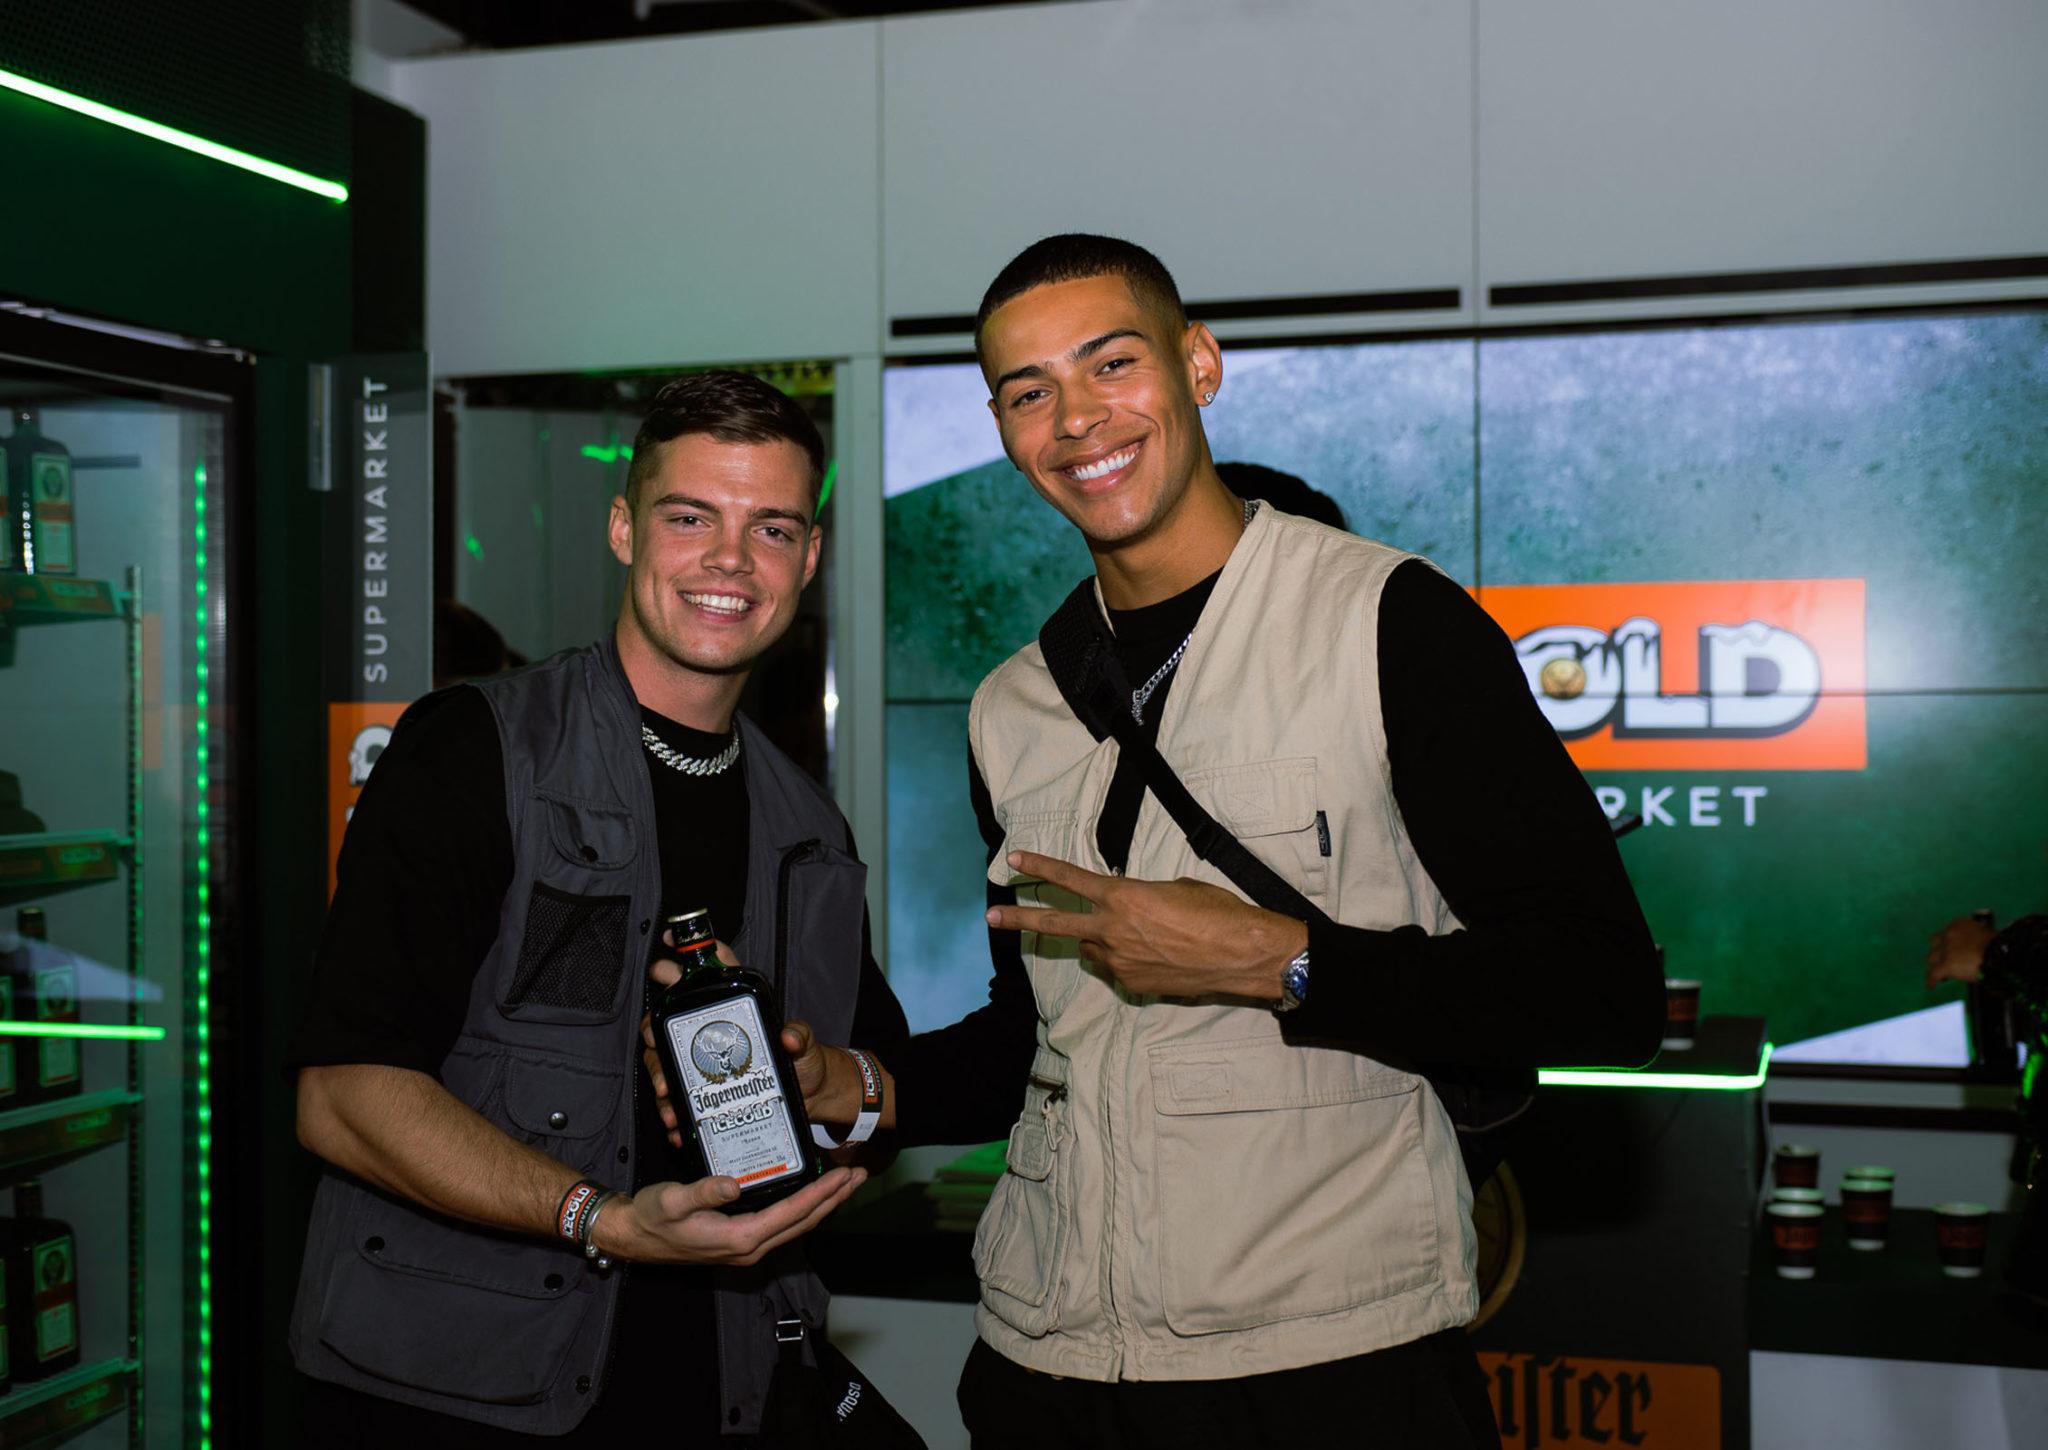 two influencers posing at Sook in Oxford Street during Jagermeister pop up